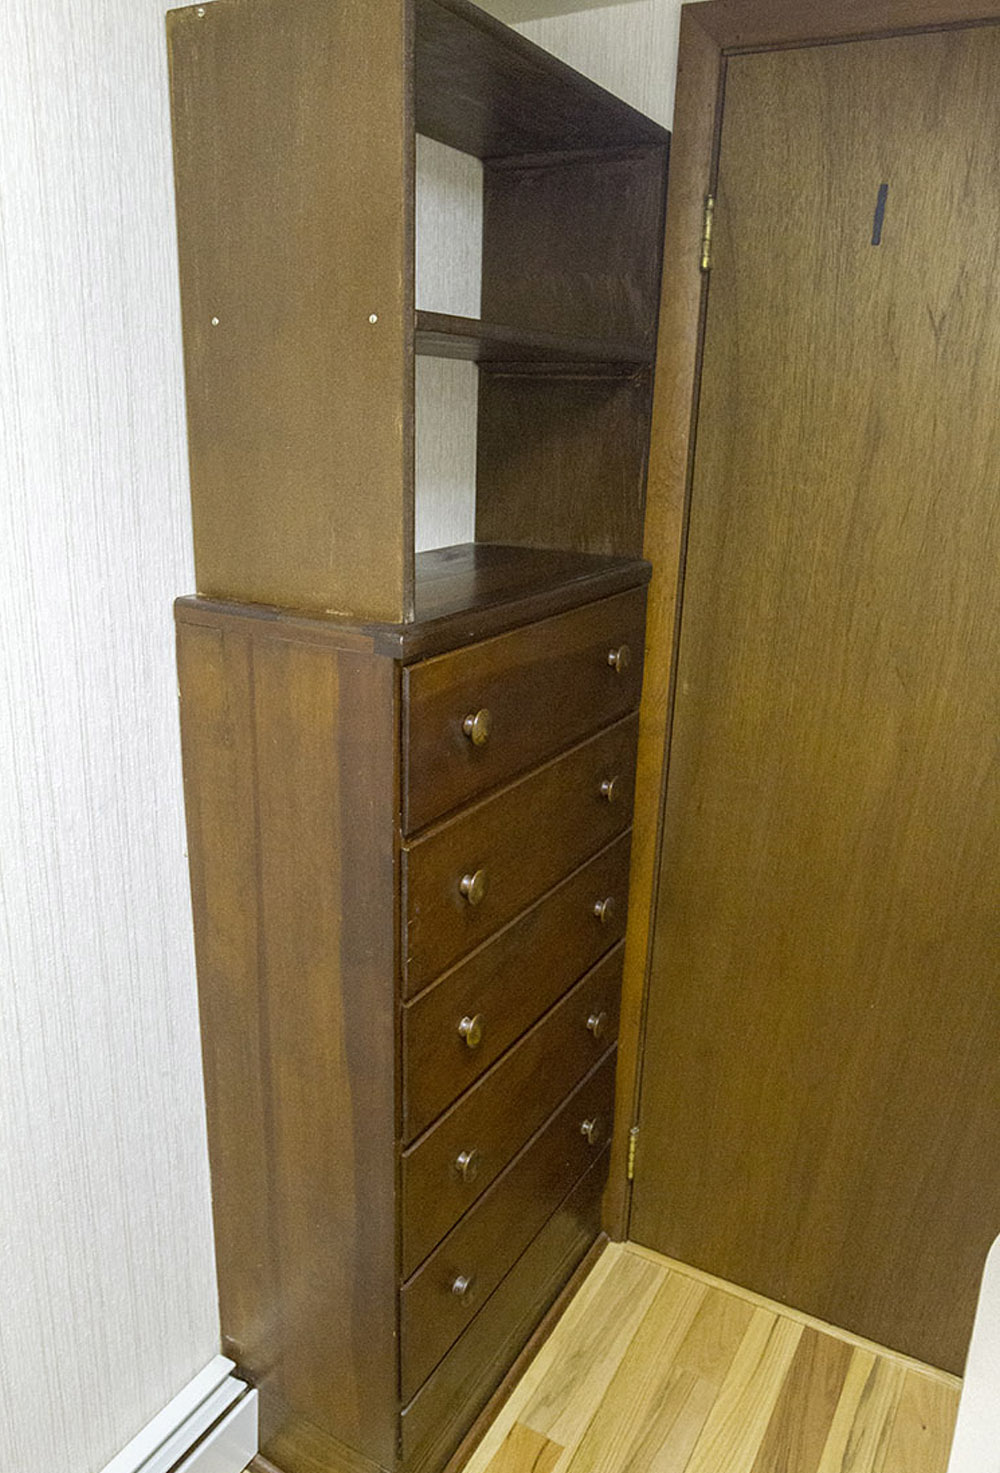 A wooden dresser with shelving on top against a white wall.